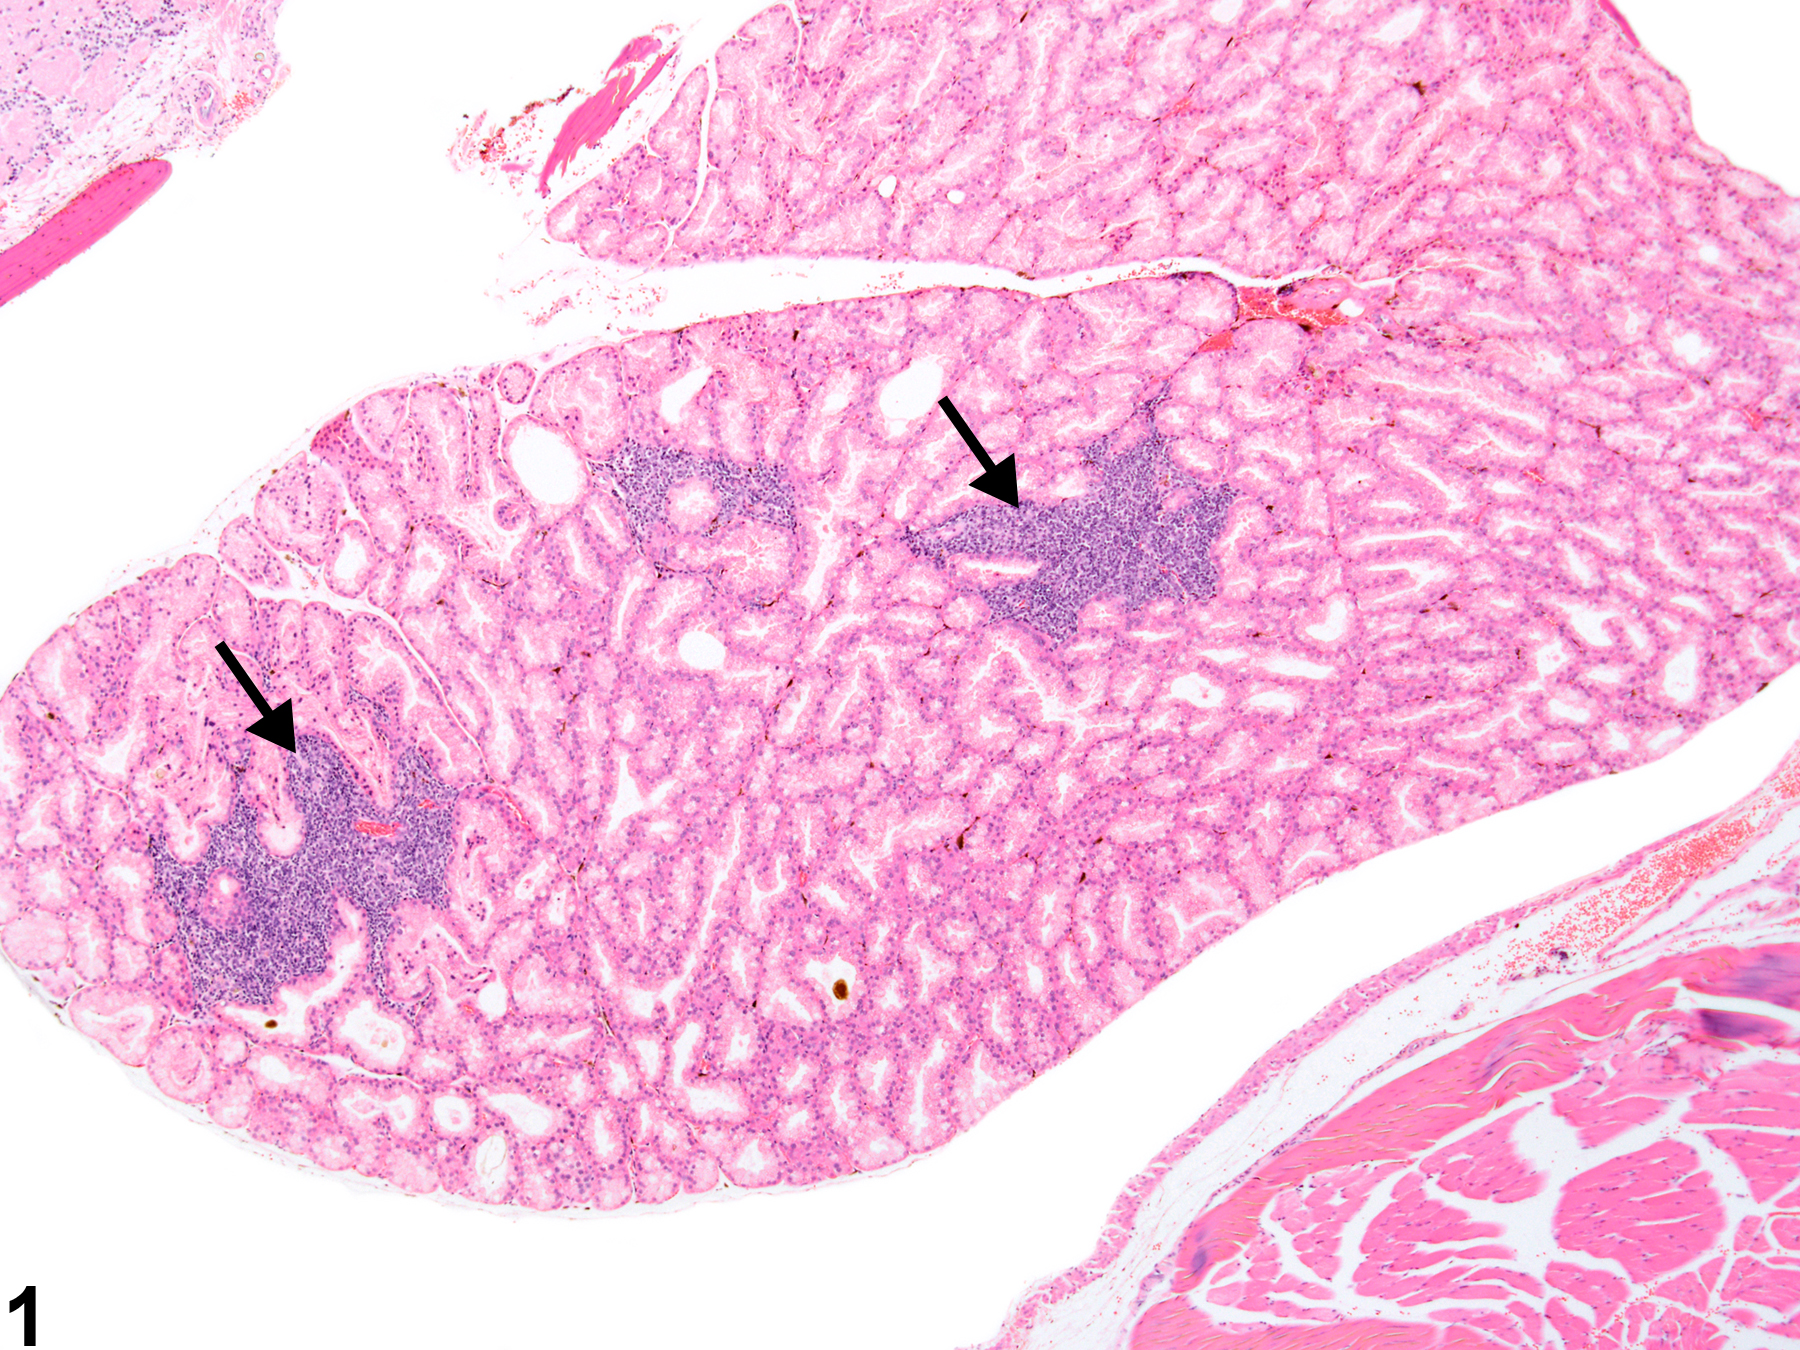 Image of infiltration cellular, mononuclear cell in the Harderian gland from a female B6C3F1 mouse in a chronic study